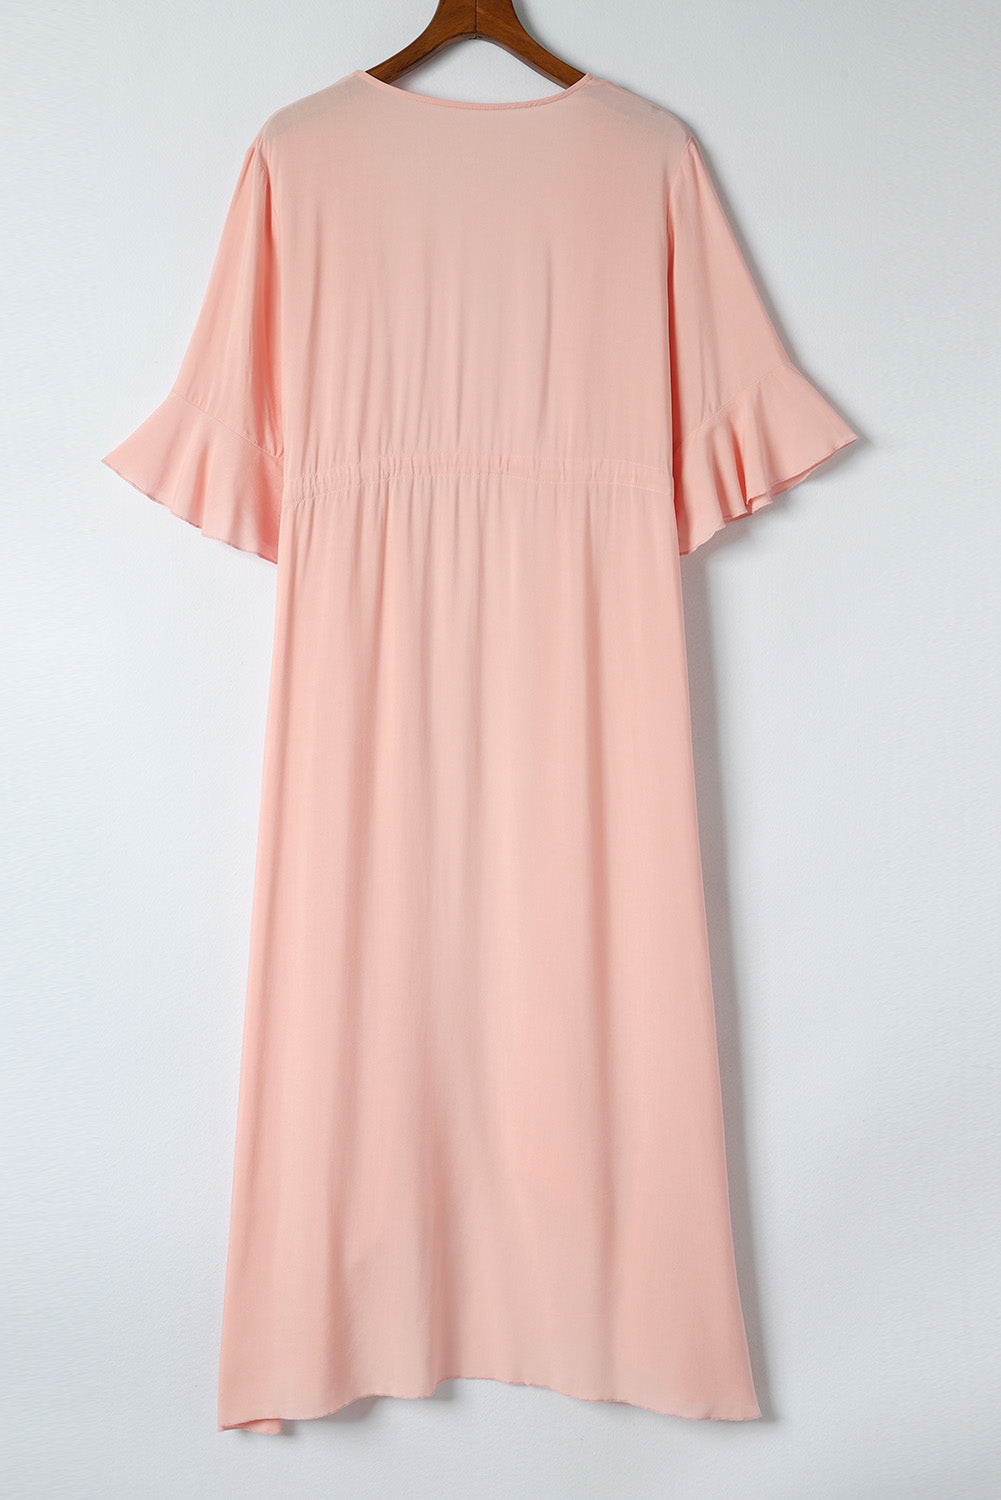 Pink Ruffle Half Sleeve Tie Front Flowy Beach Cover Up